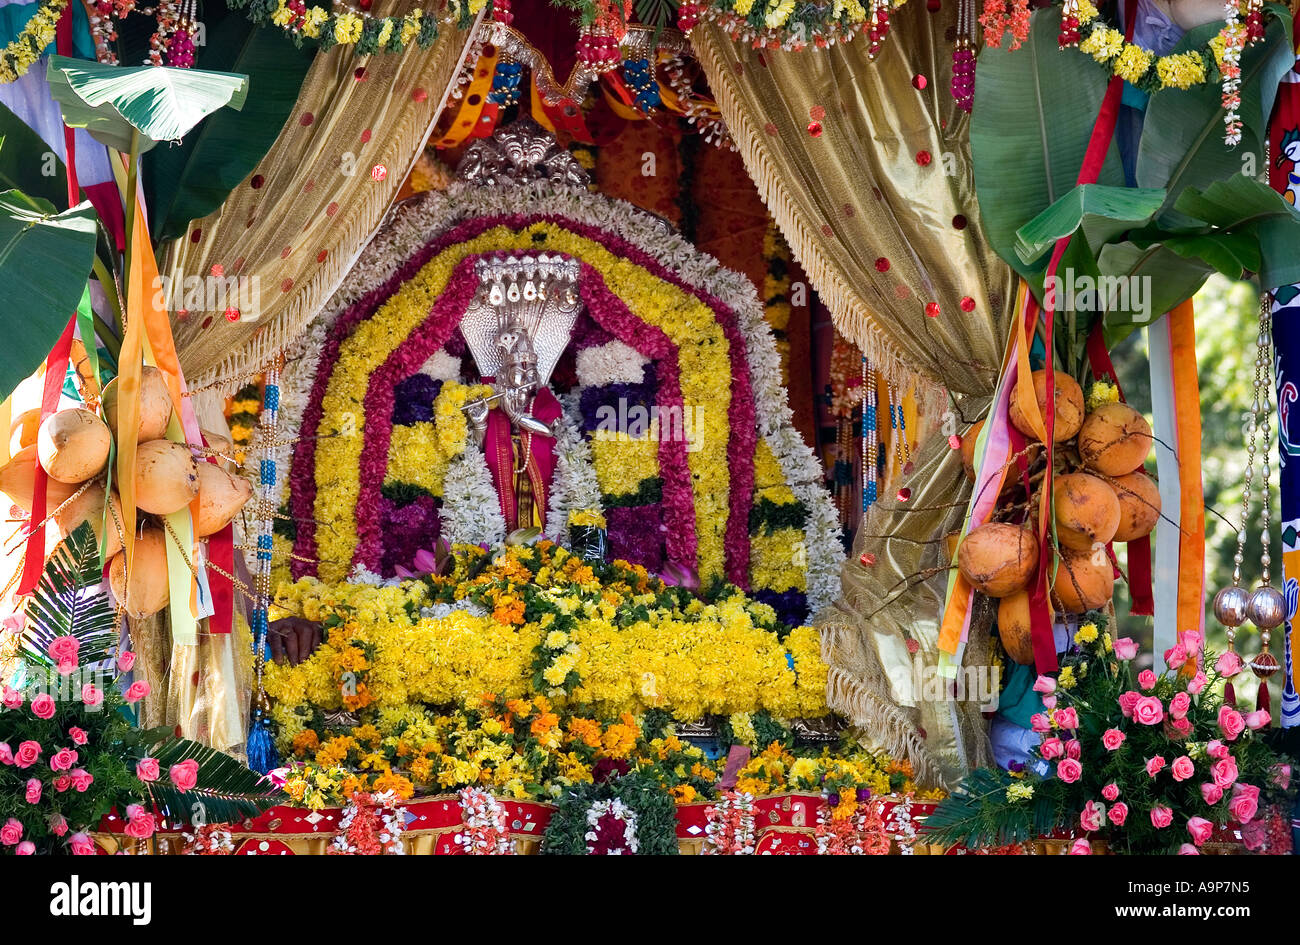 Krishna statue on chariot during Indian festival parade Stock Photo